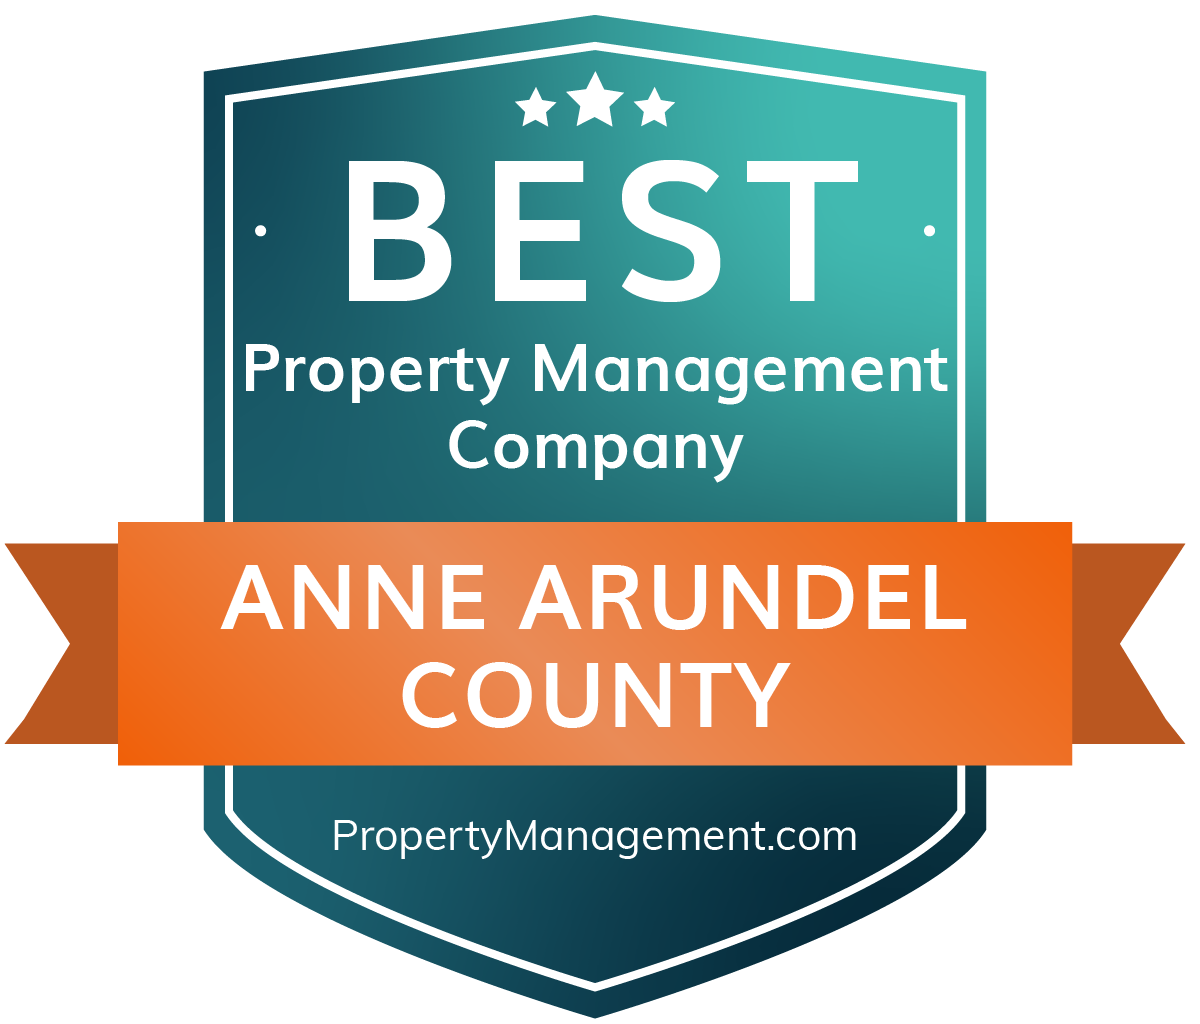 The Best Property Management Companies in Anne Arundel County, Maryland of 2022